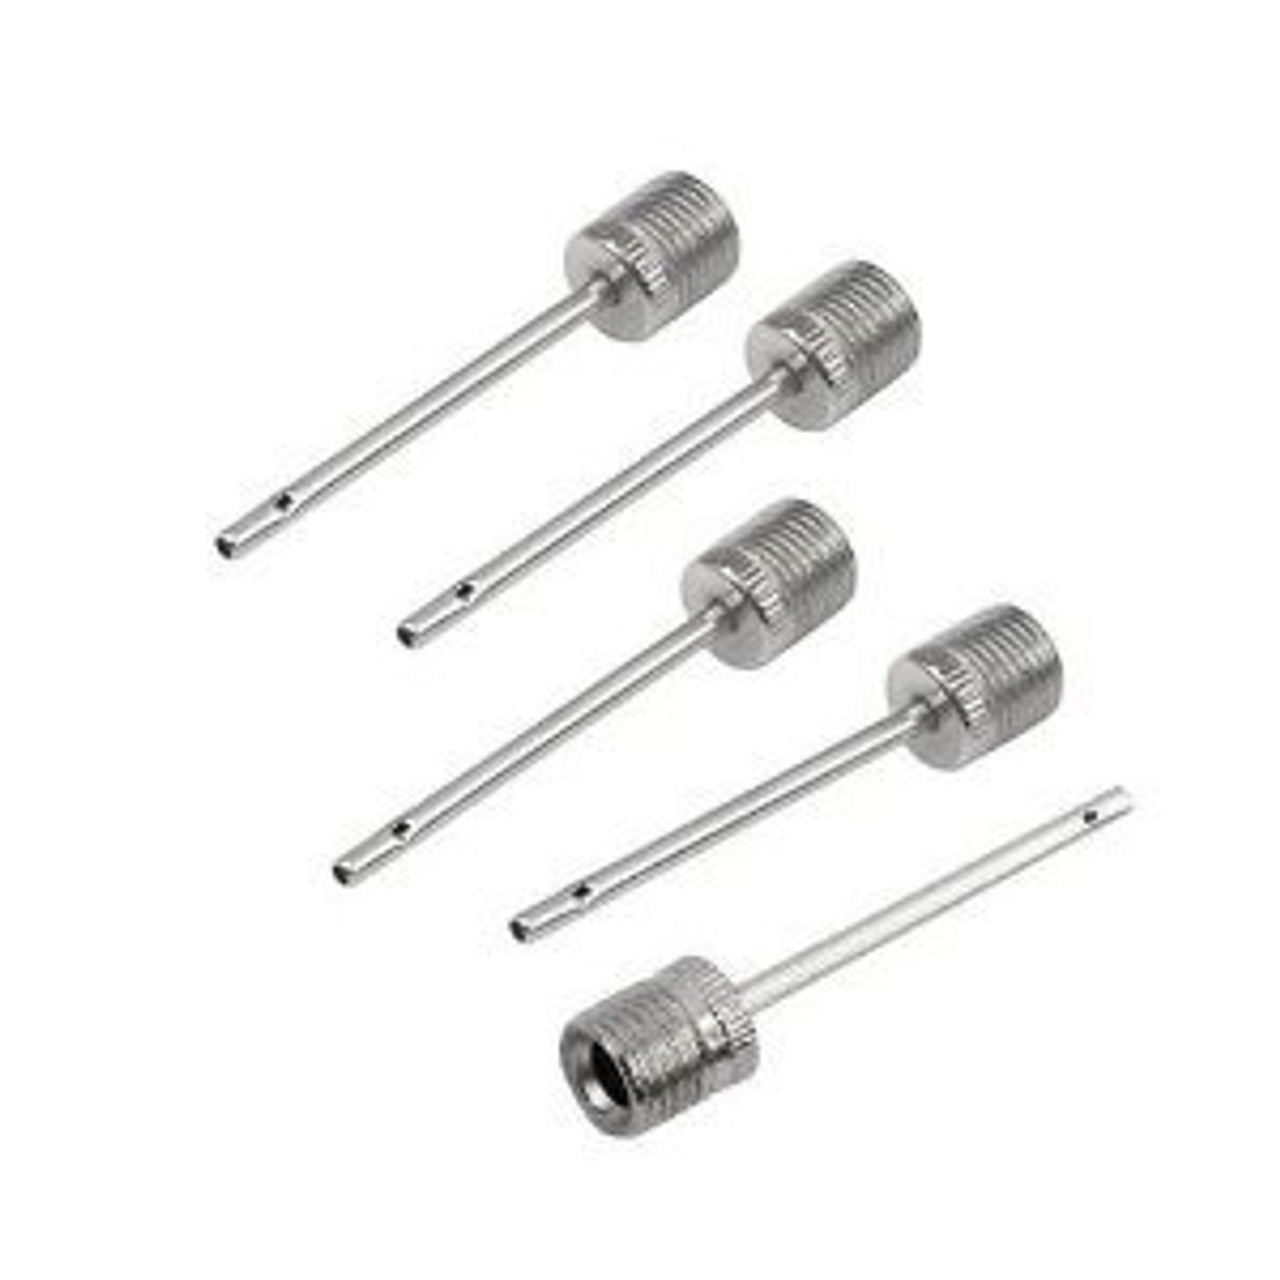 Standard Inflating Needles (Pack of 5)